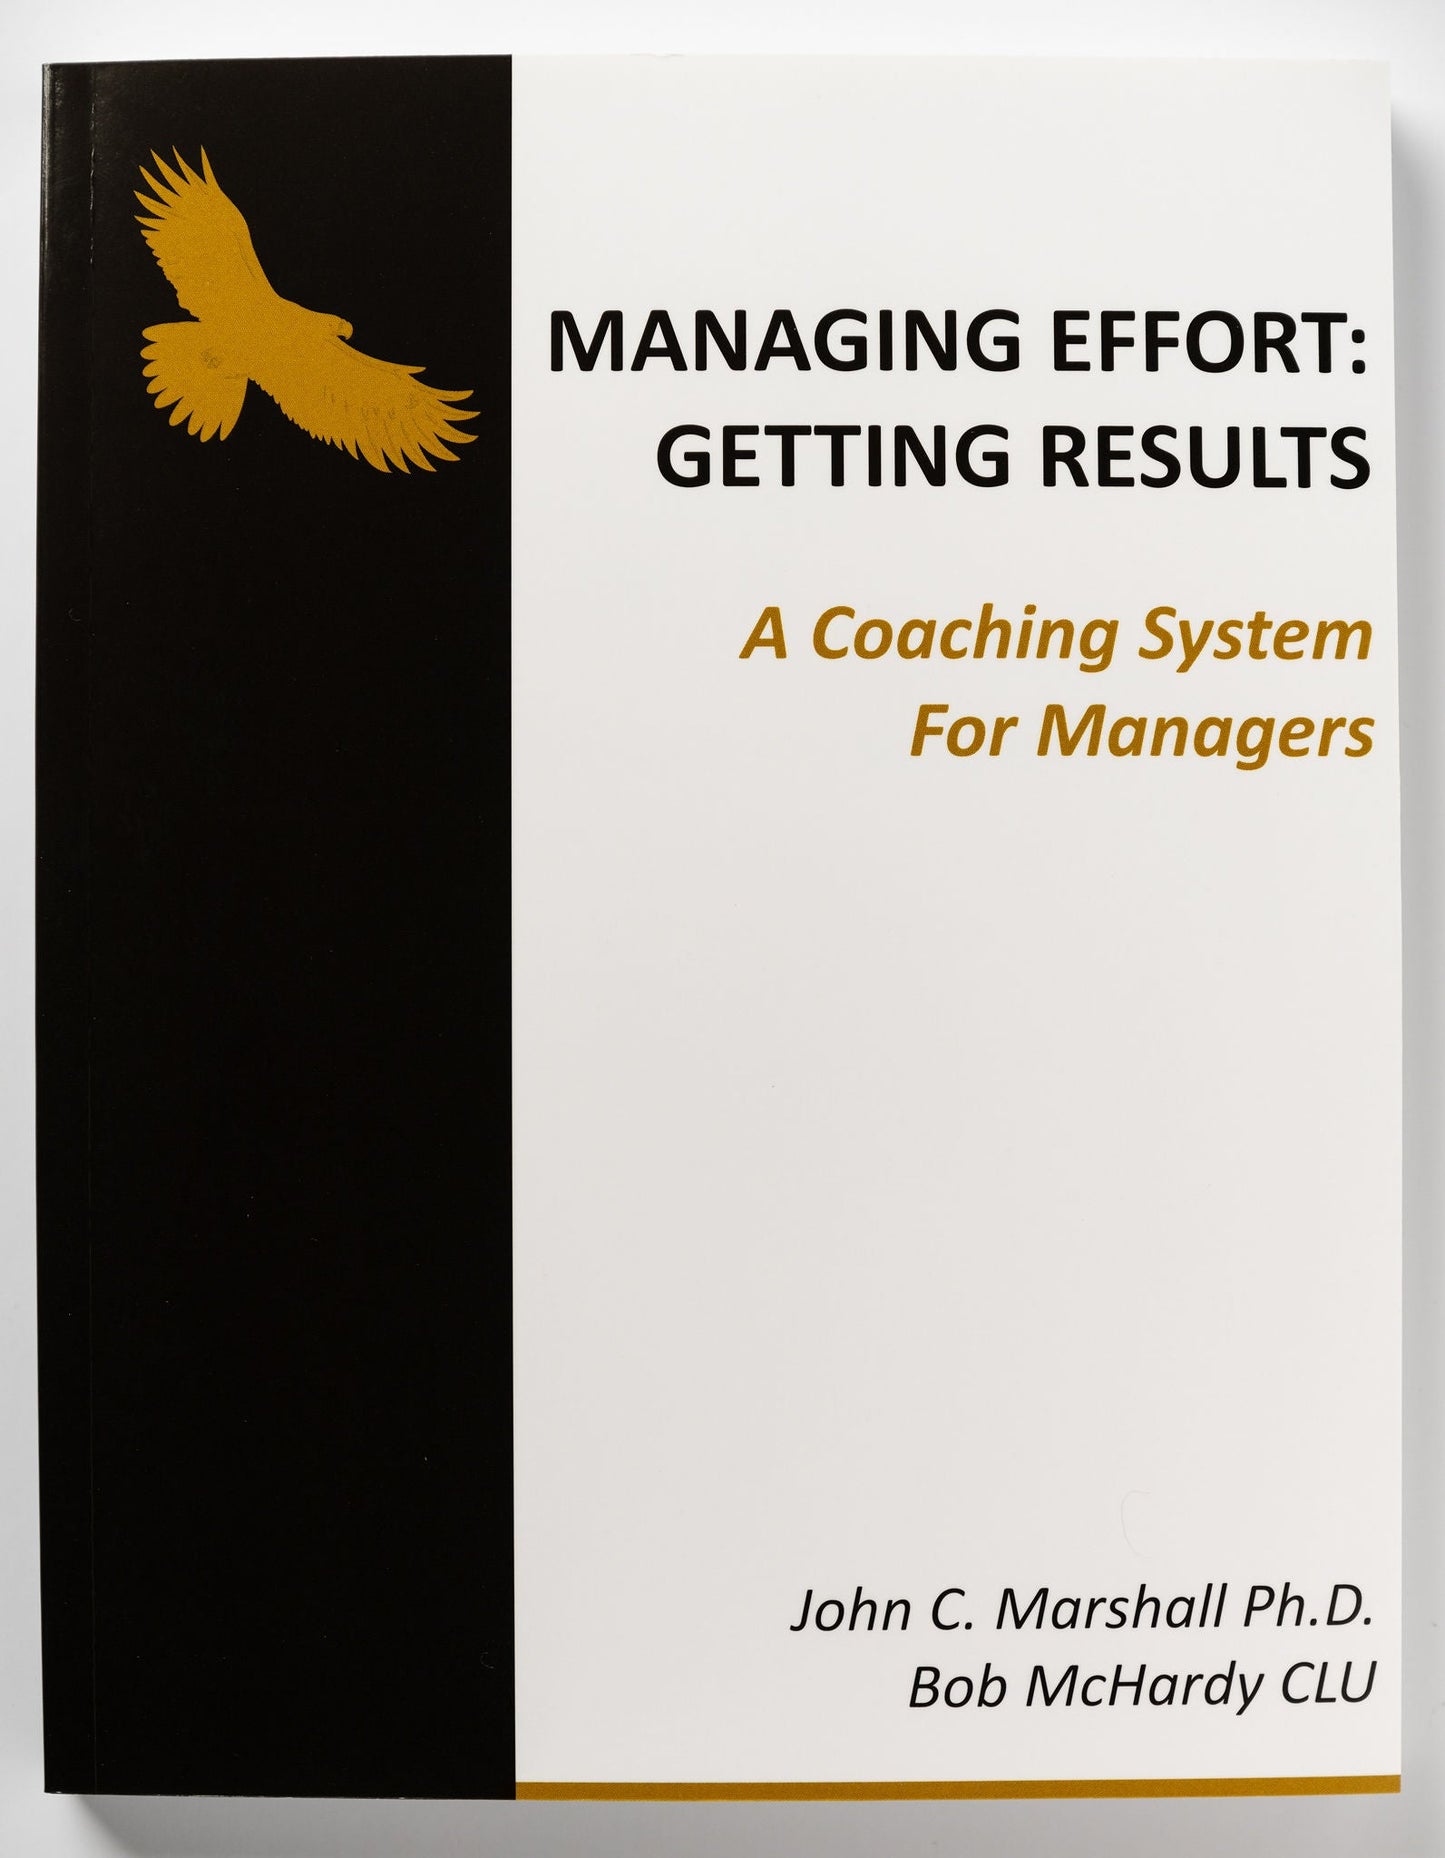 Managing Effort: Getting Results – A Coaching System for Managers (USD)